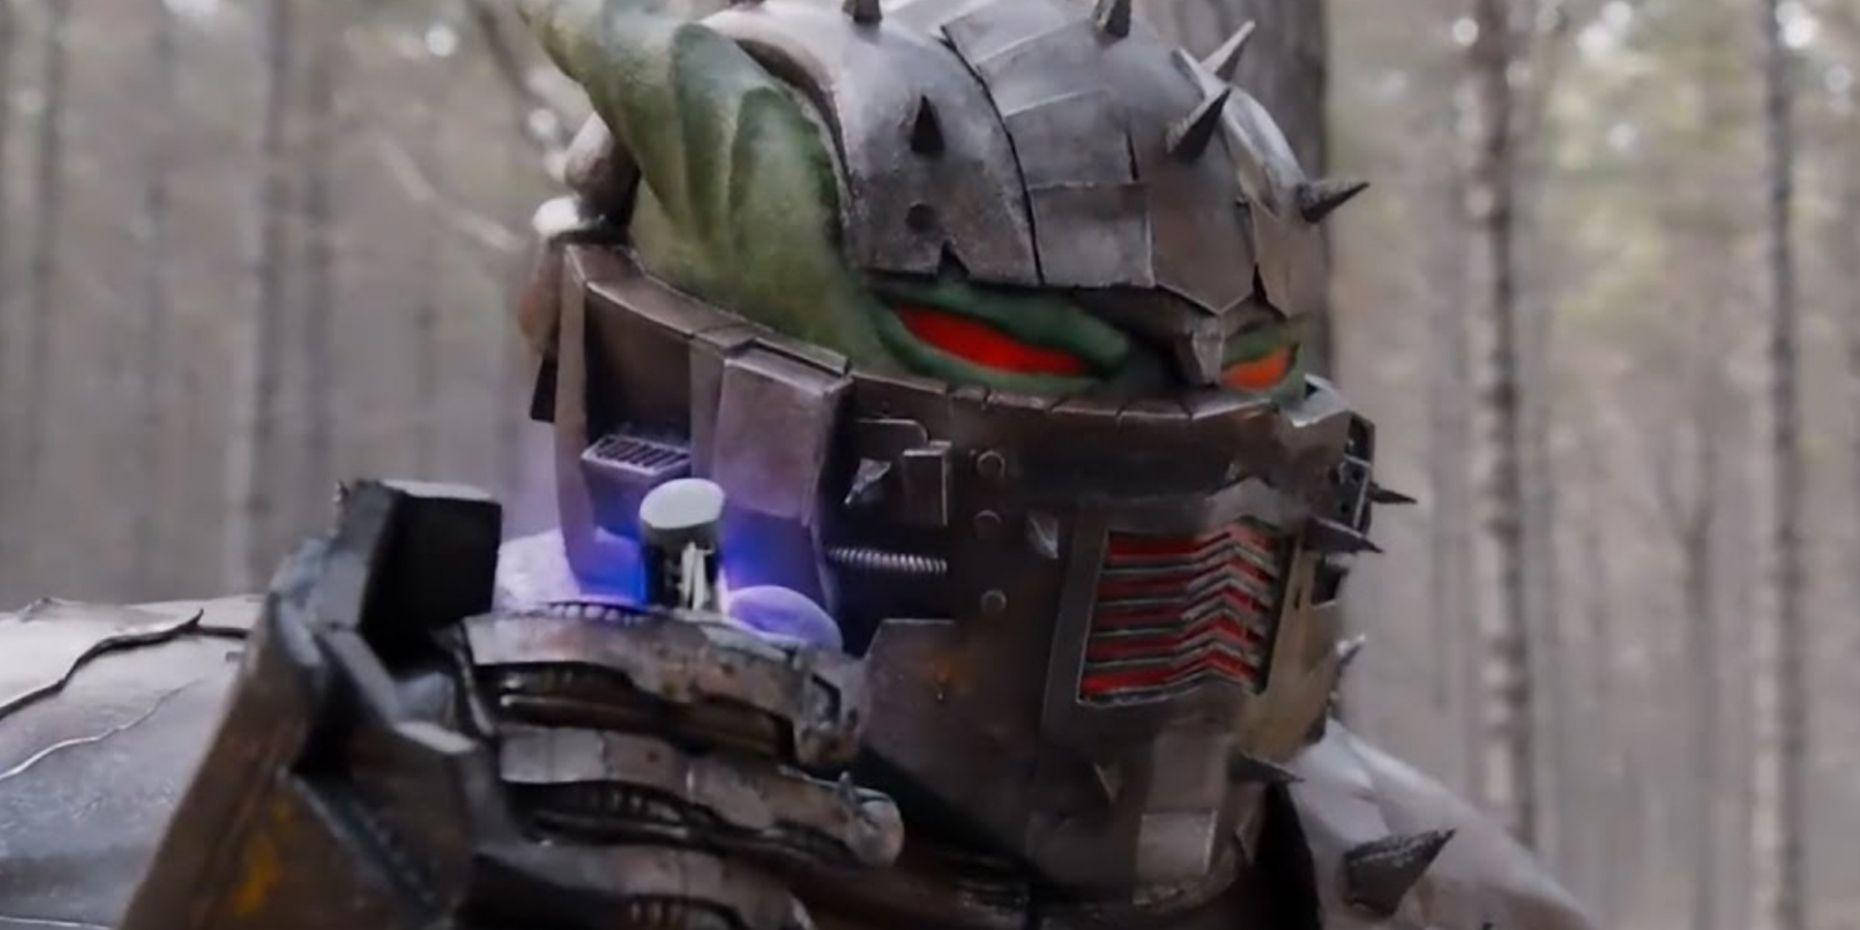 Sledge in his armor in Power Rangers Dino Charge